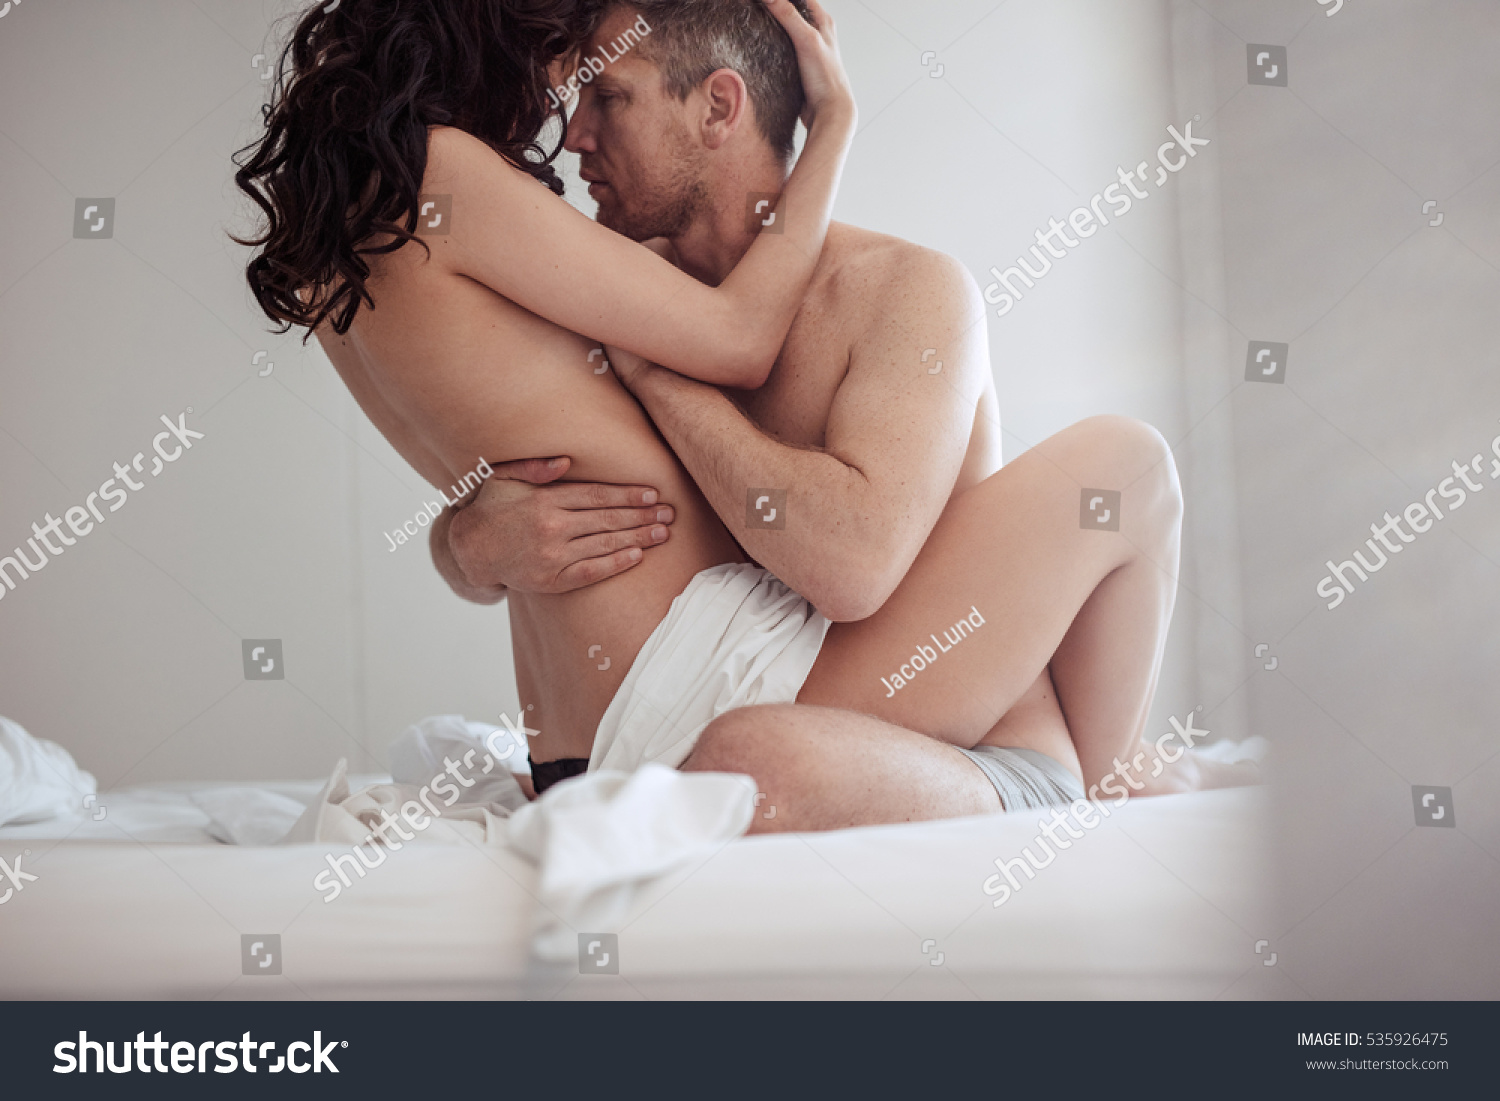 Pictures Of A Couple Having Sex 30